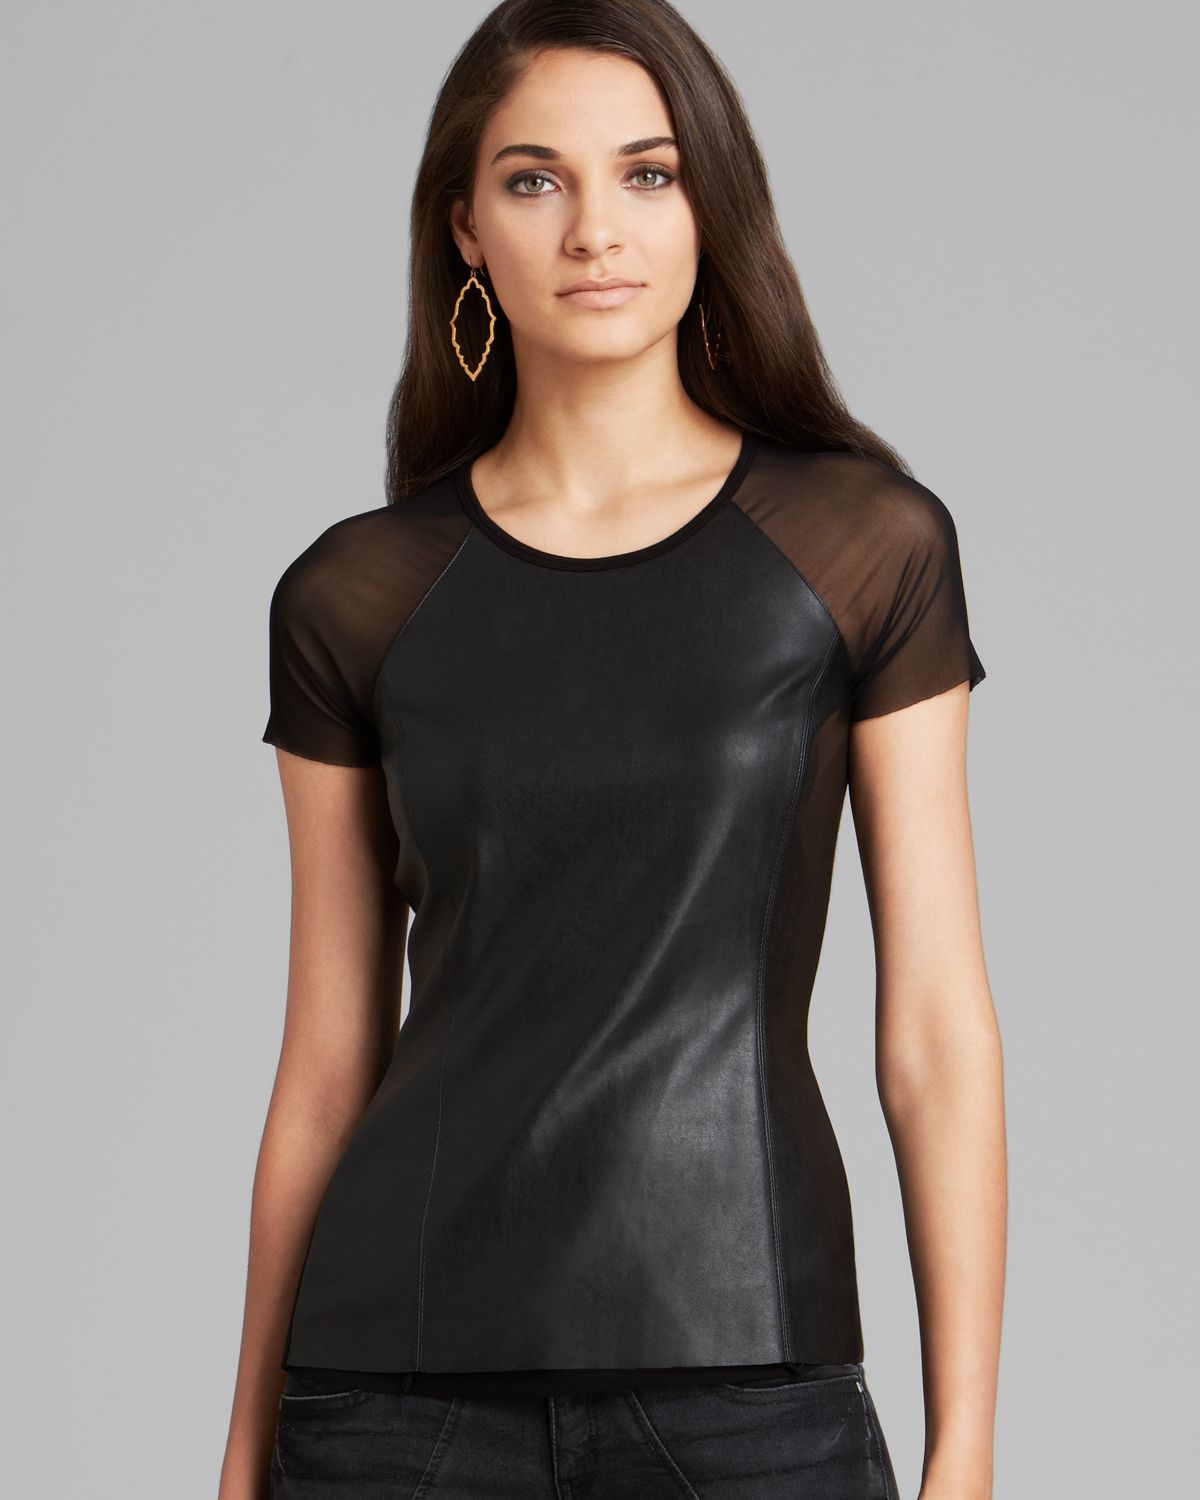 Lyst - Bailey 44 Top - Faux Leather in Black